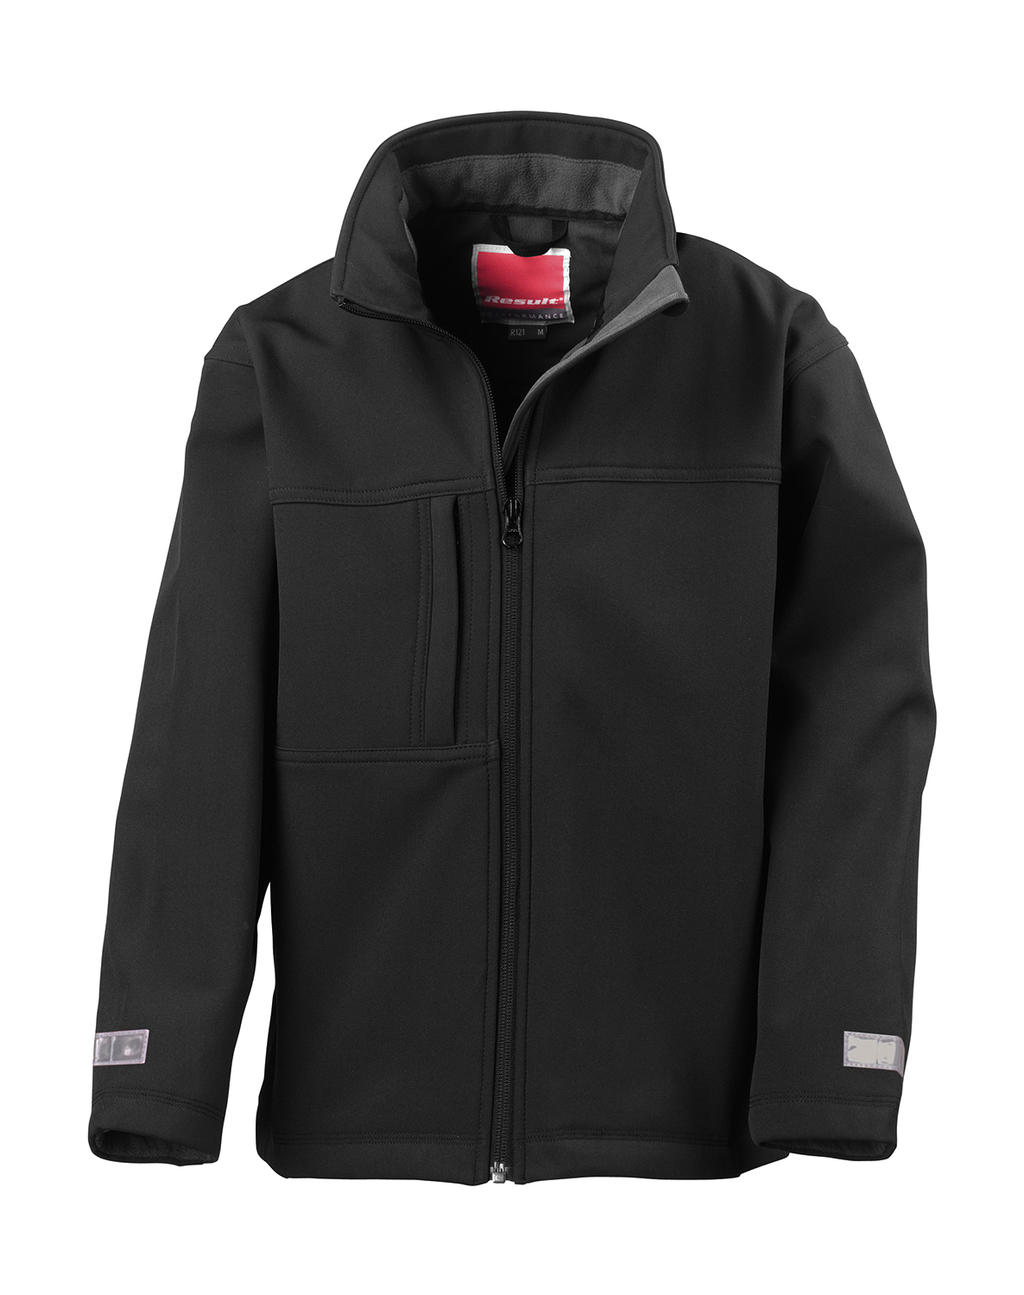  Junior/Youth Classic Soft Shell in Farbe Black